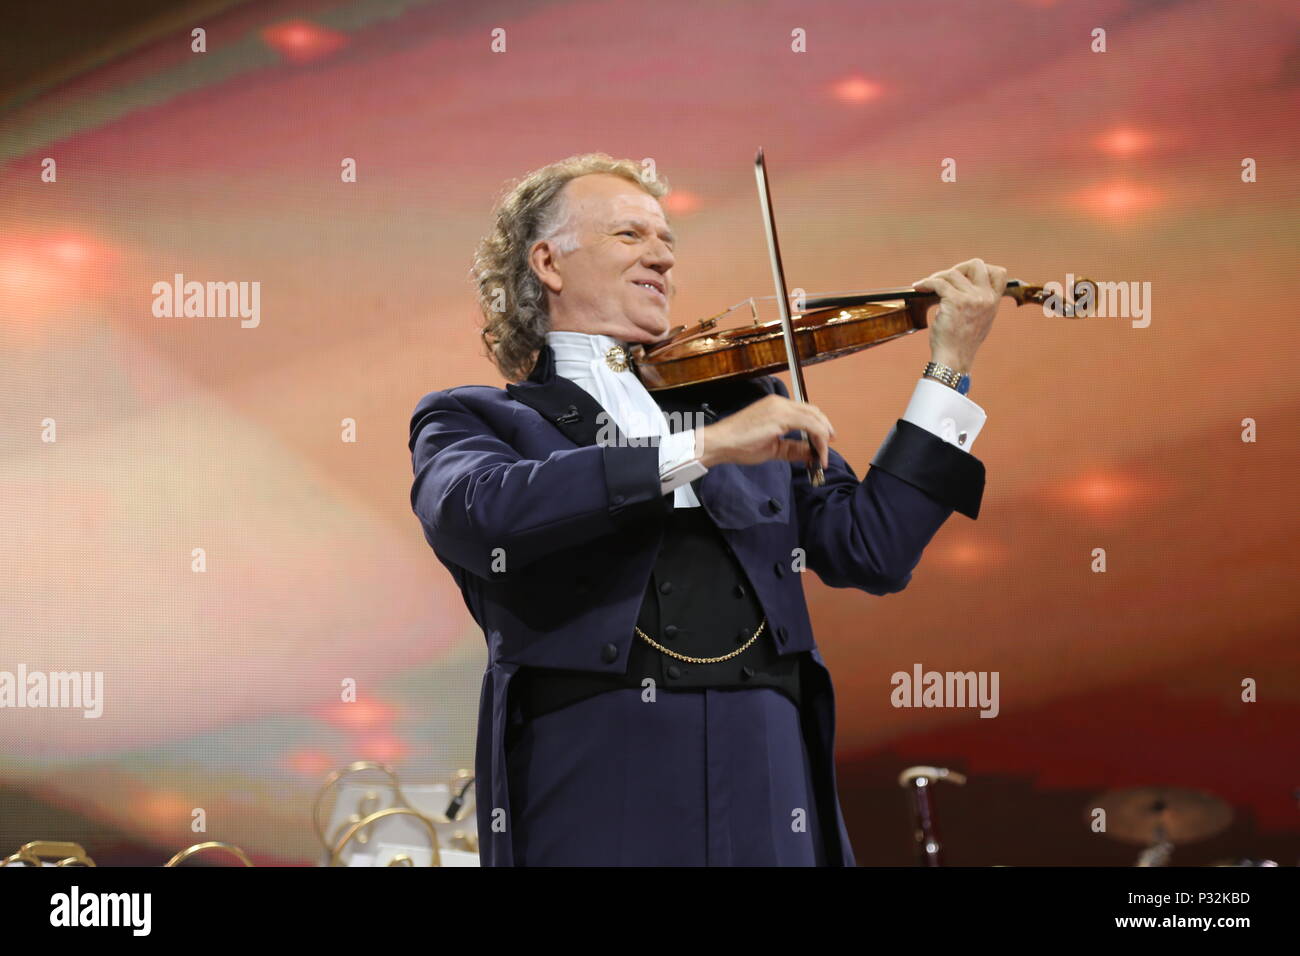 Sofia, Bulgaria. 16th June, 2018. Dutch violinist Andre Rieu performs during a concert in Sofia, Bulgaria, on June 16, 2018. Credit: Zhan Xiaoyi/Xinhua/Alamy Live News Stock Photo